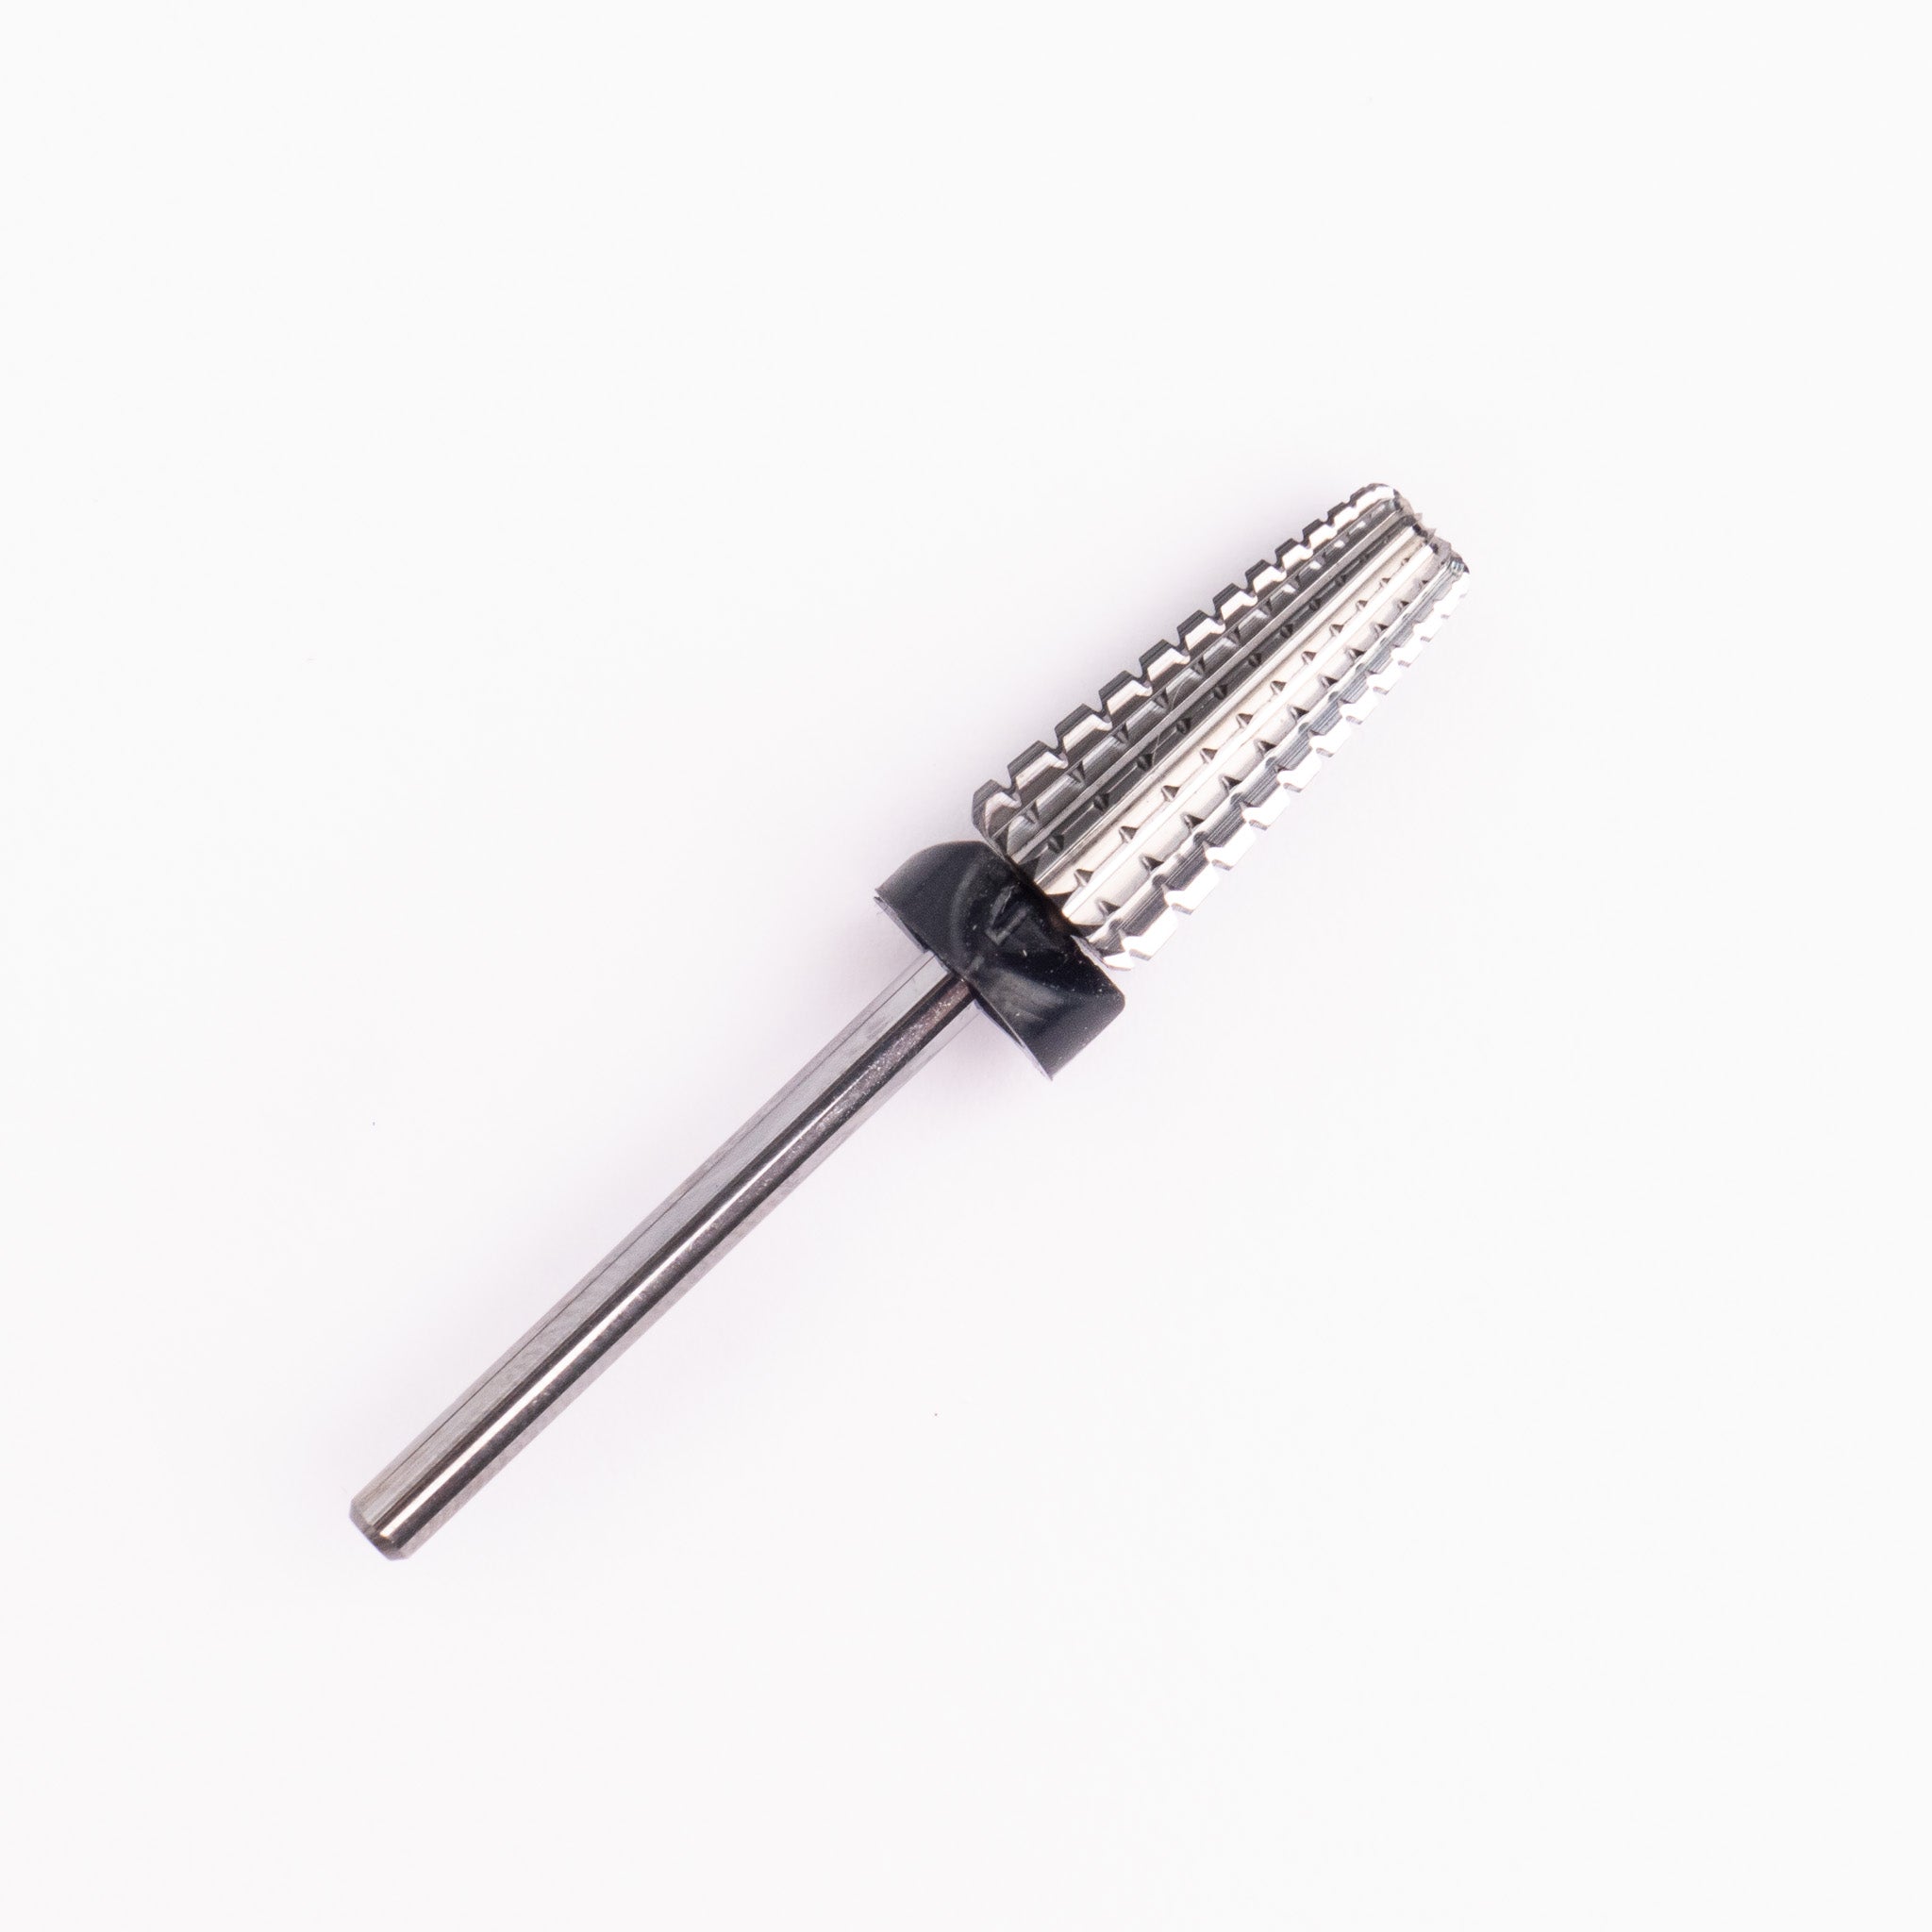 5 in 1 Carbide Drill Bit | For Nails